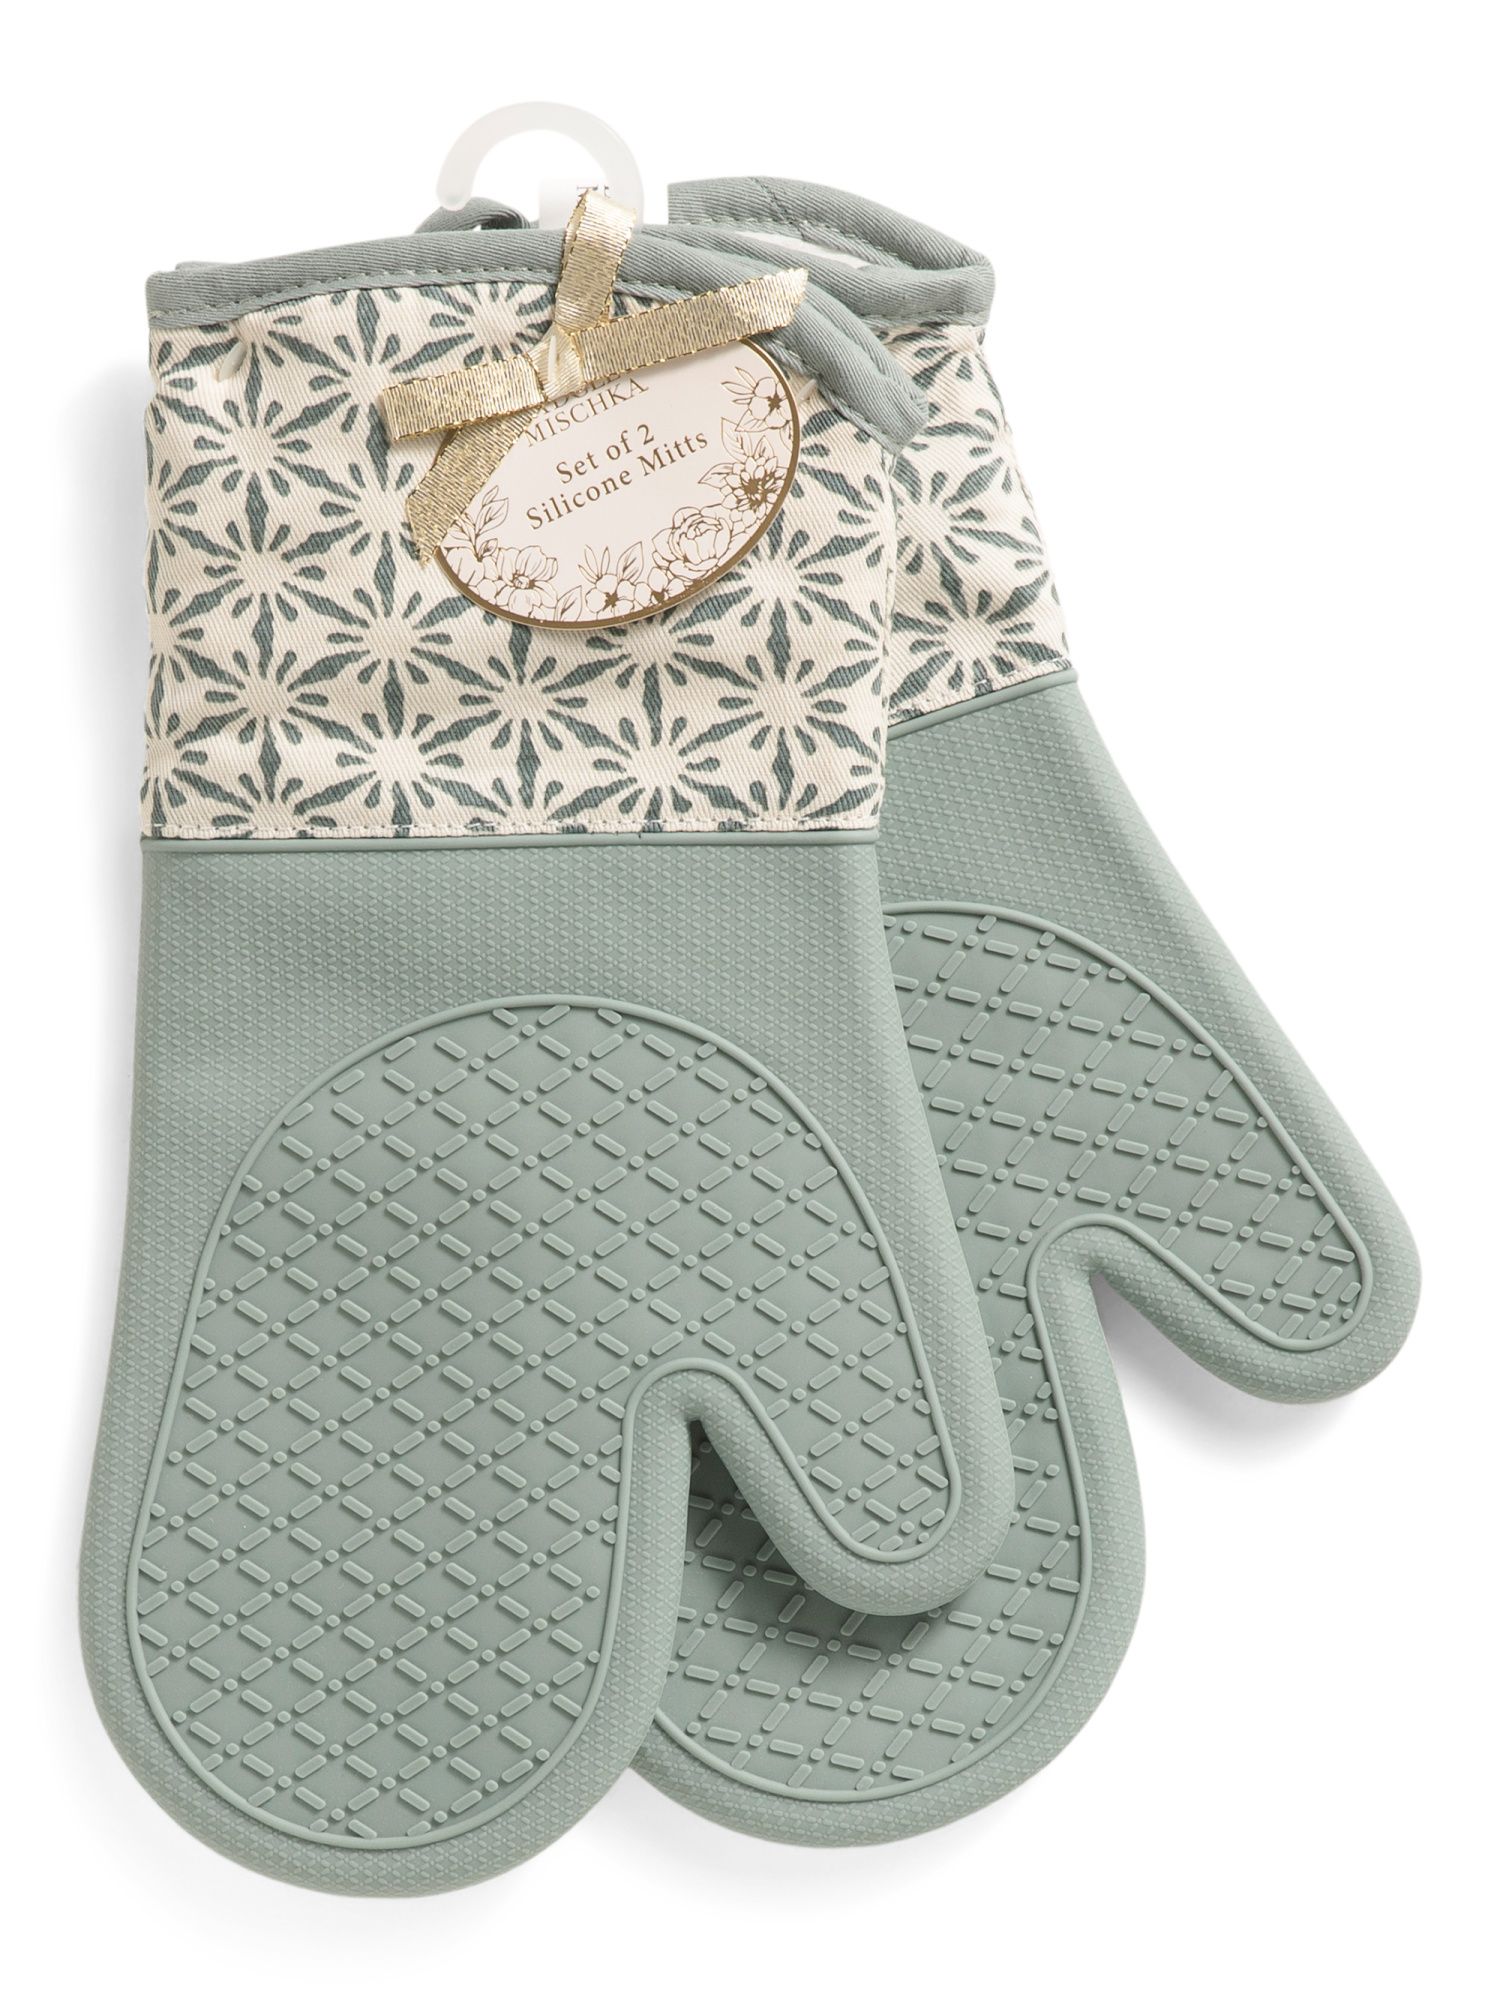 2pc Printed Fabric With Silicone Oven Mittens | Marshalls